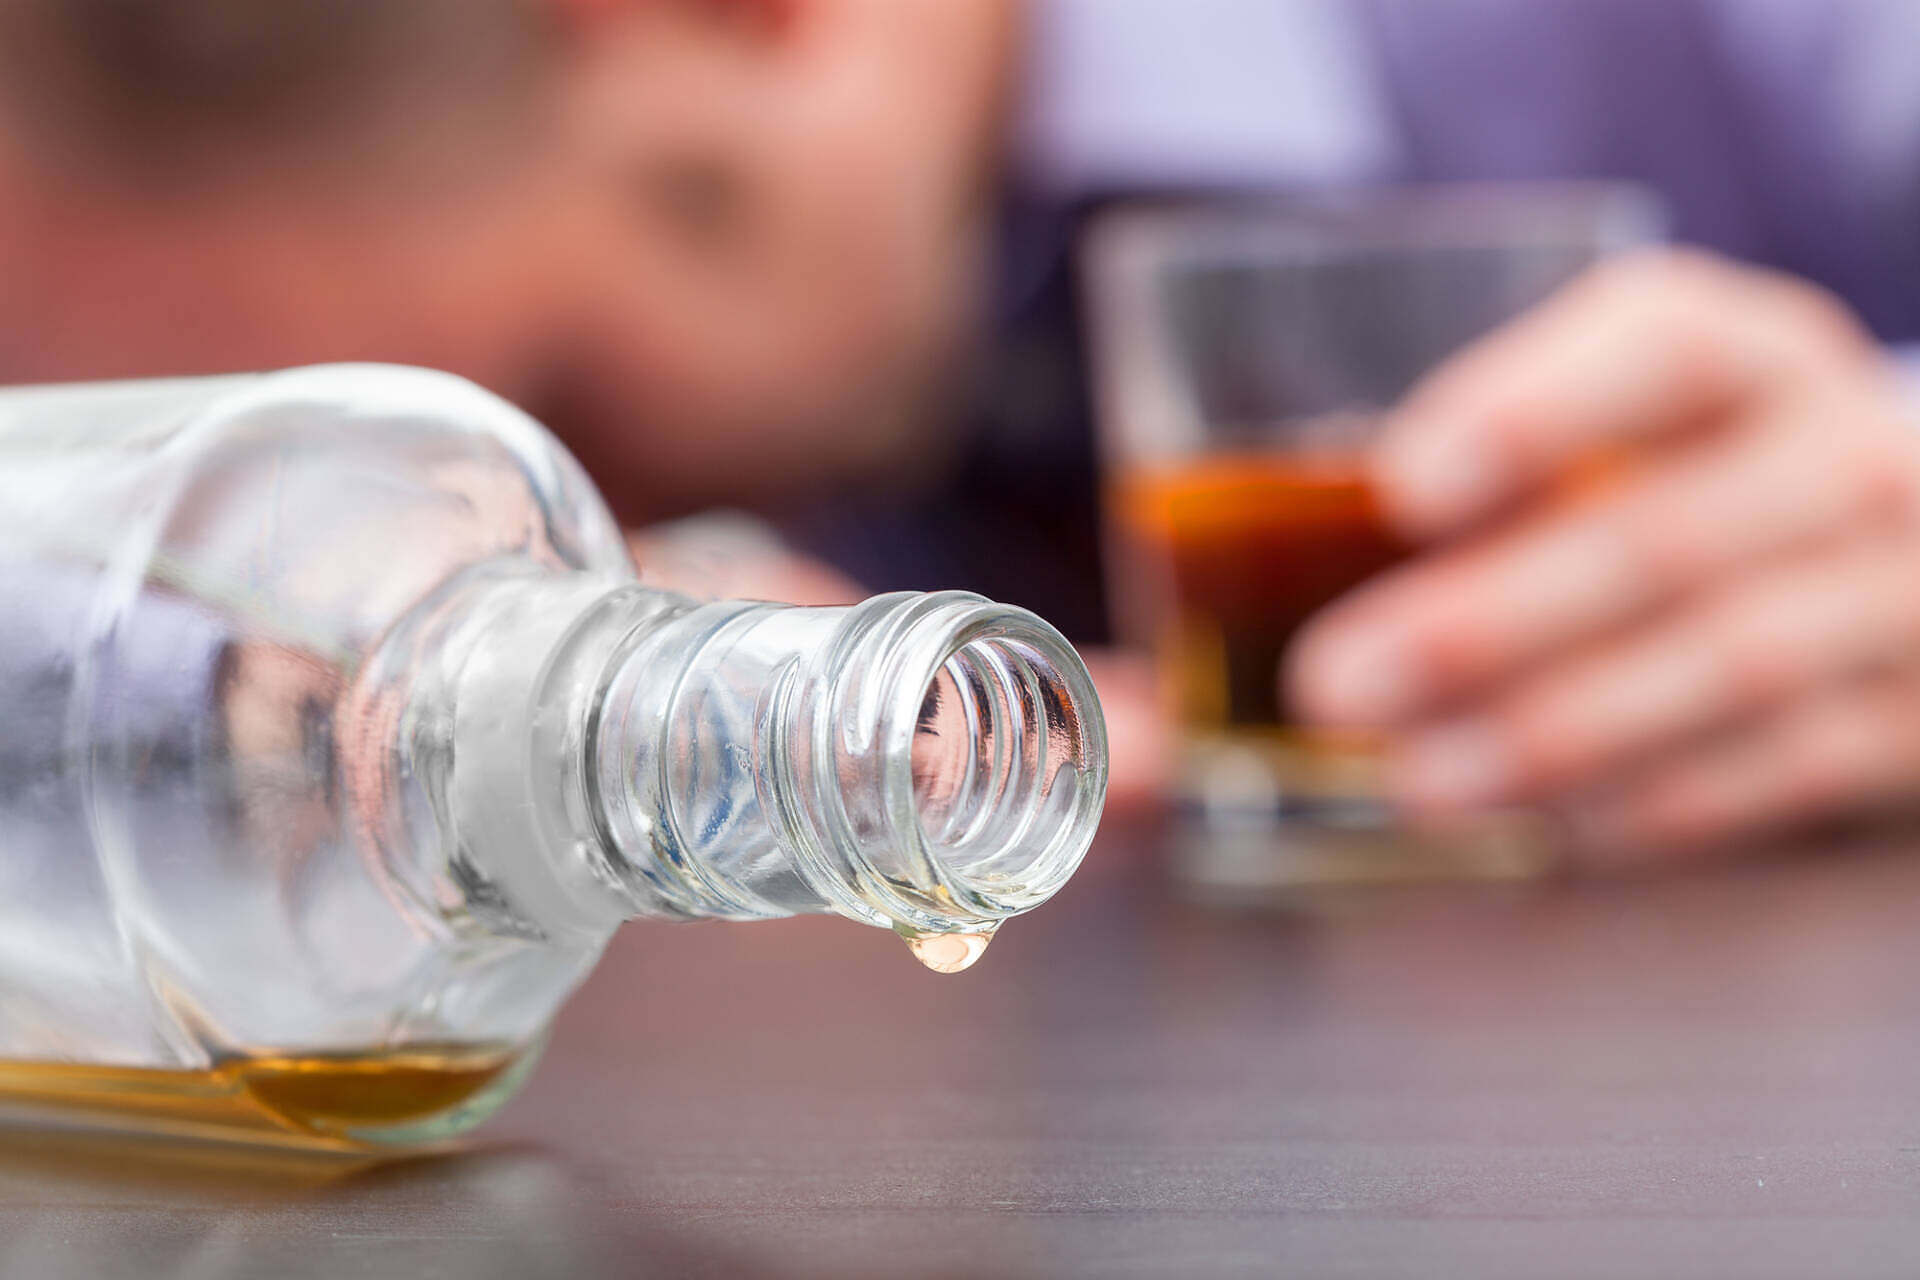 Medications for alcoholism